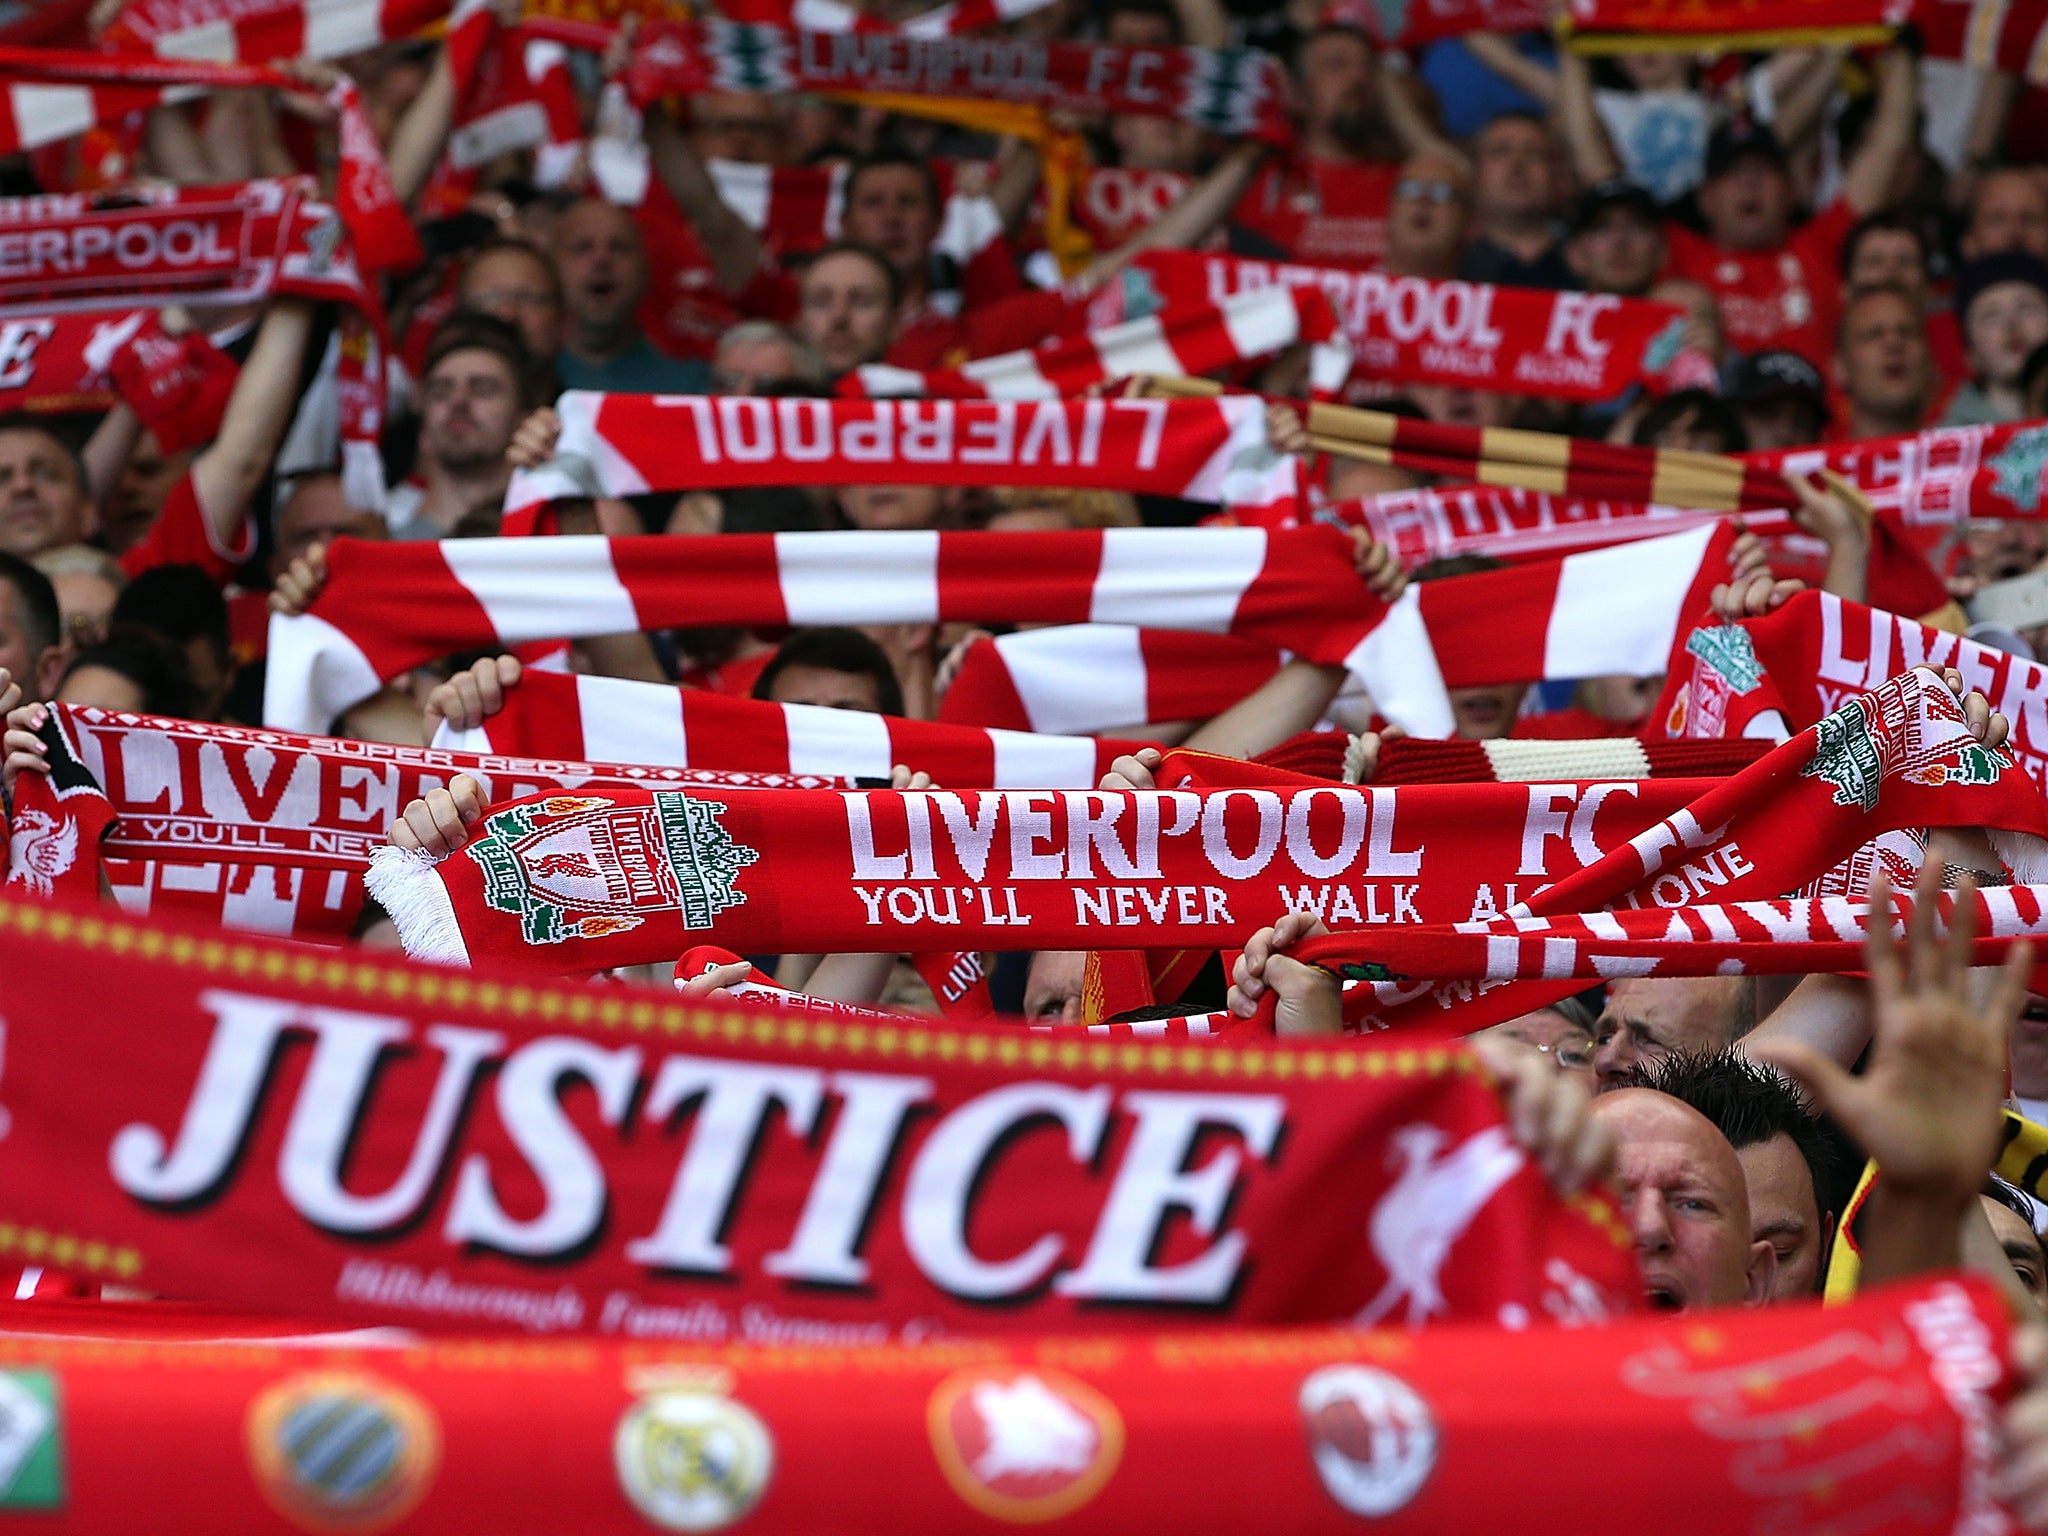 Liverpool supporters are paying sizeable amounts for a chance to see their team in the Europa League final